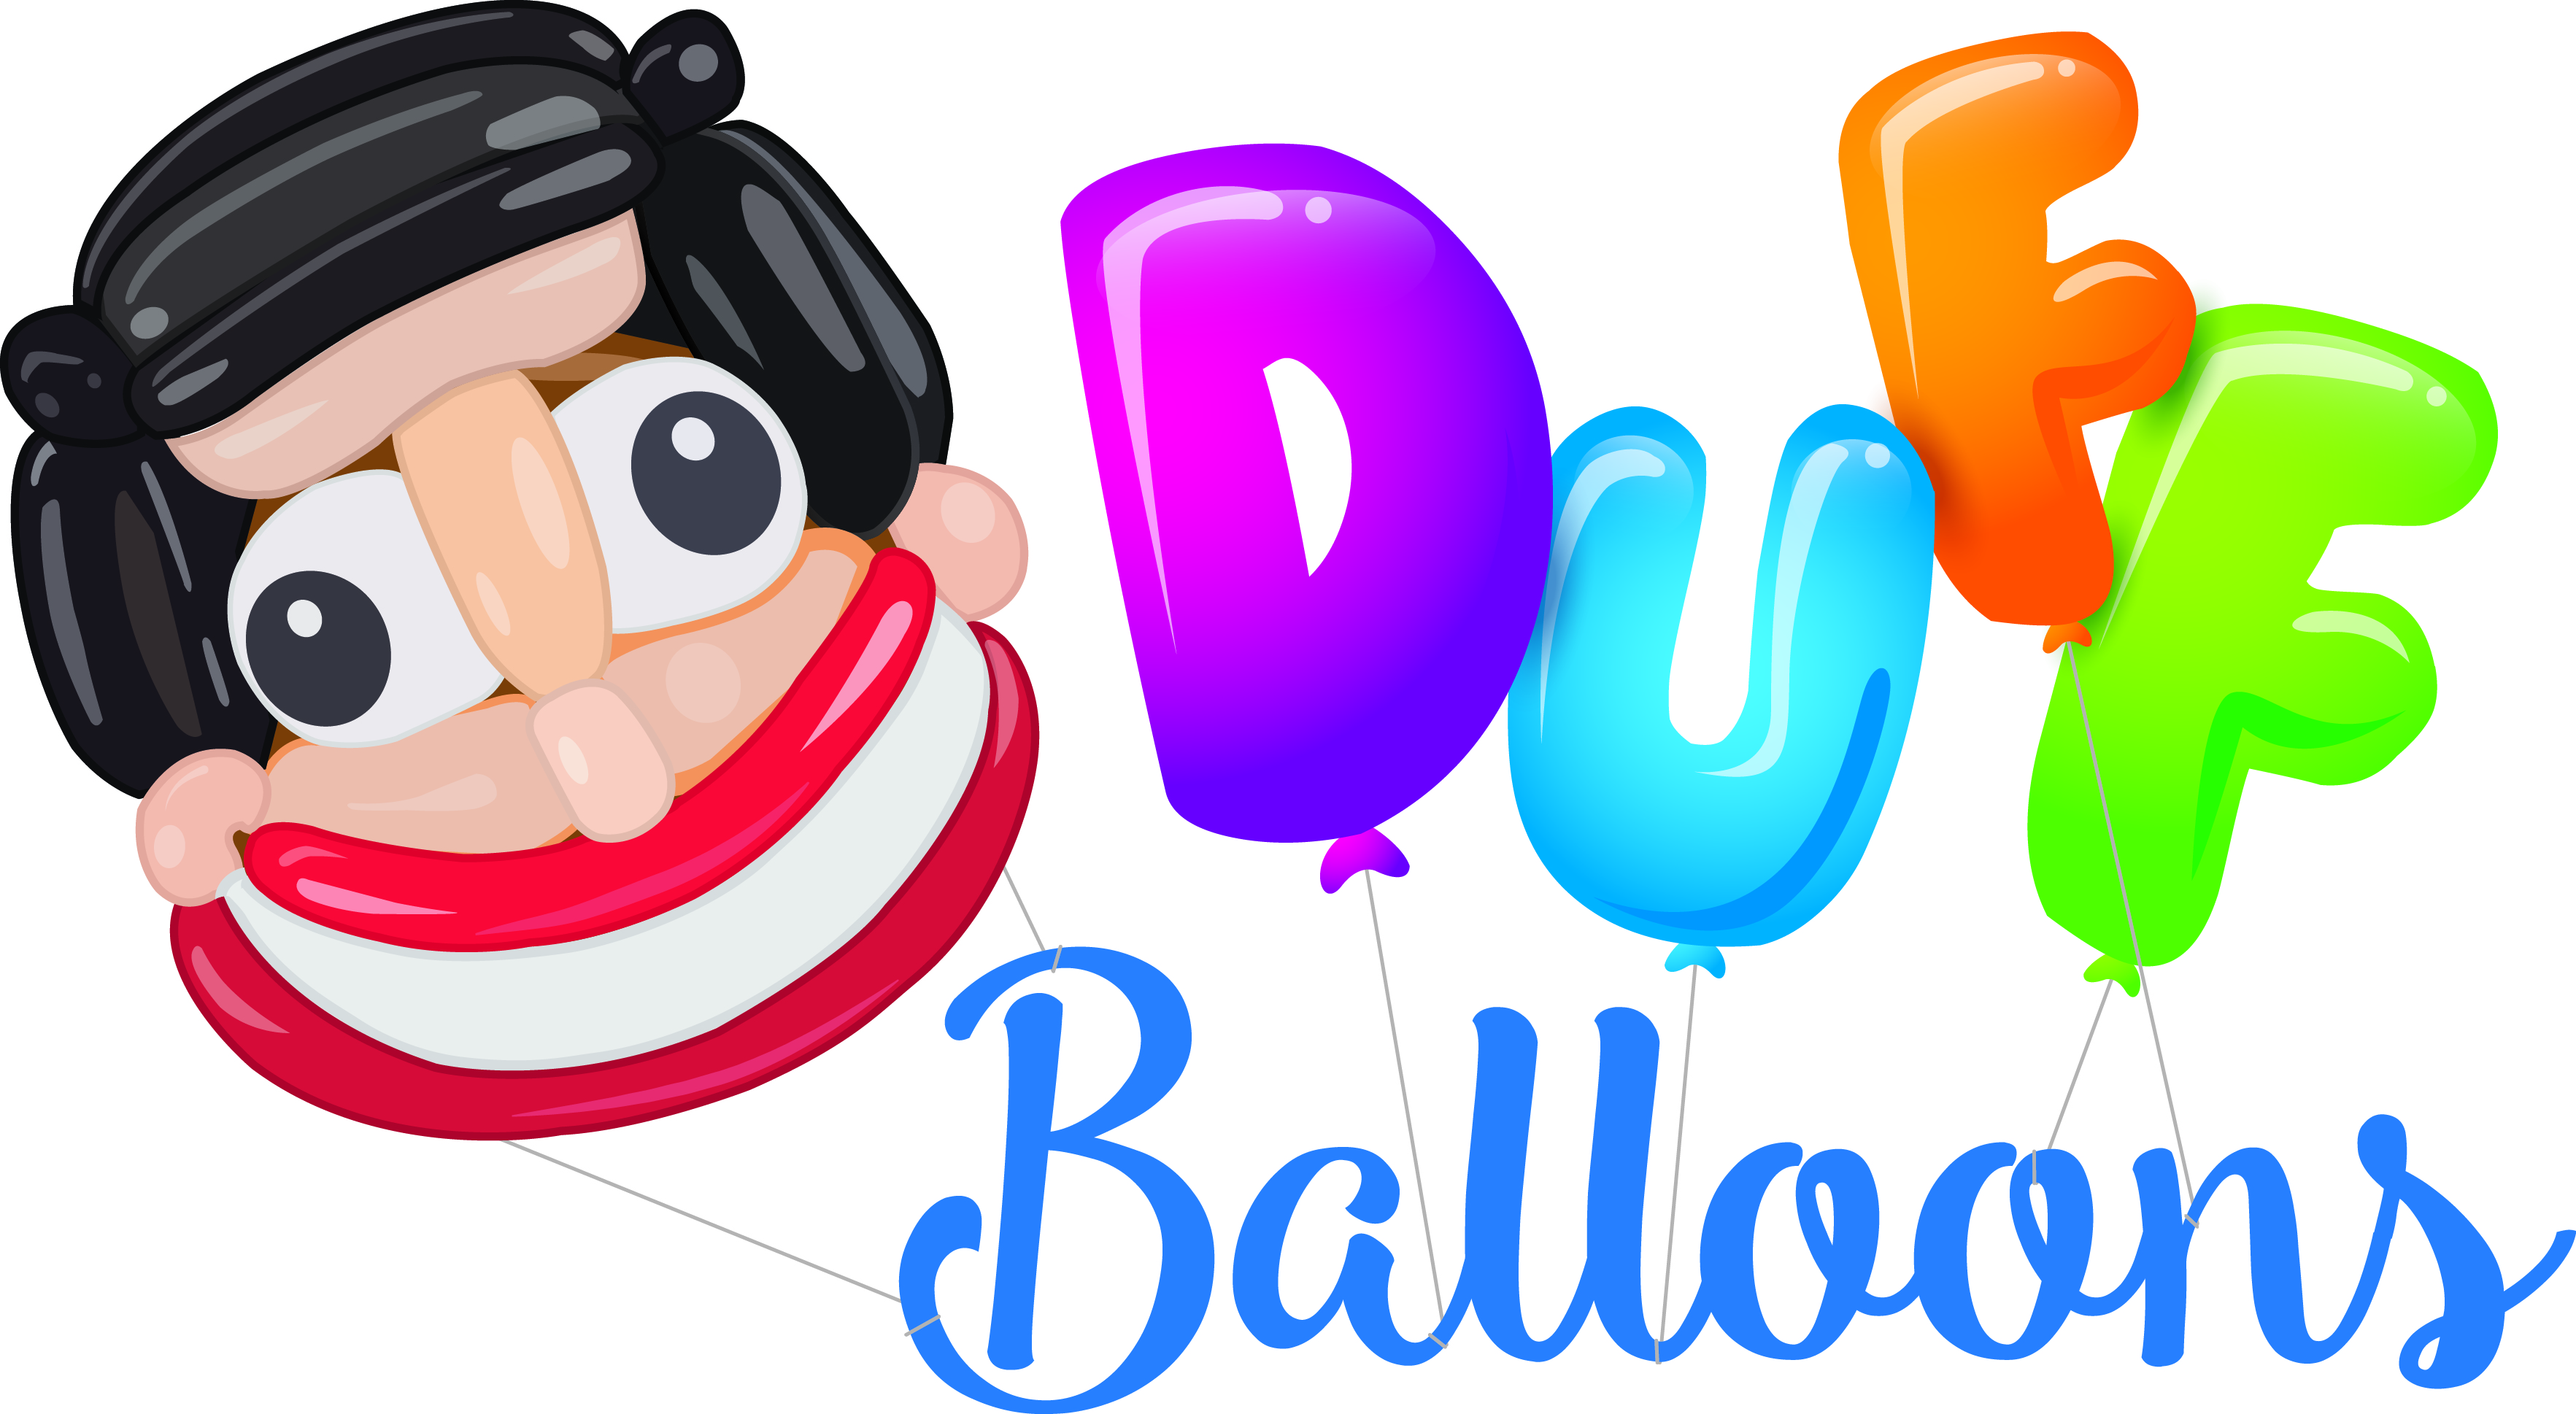 Business Profile - Duff Balloons